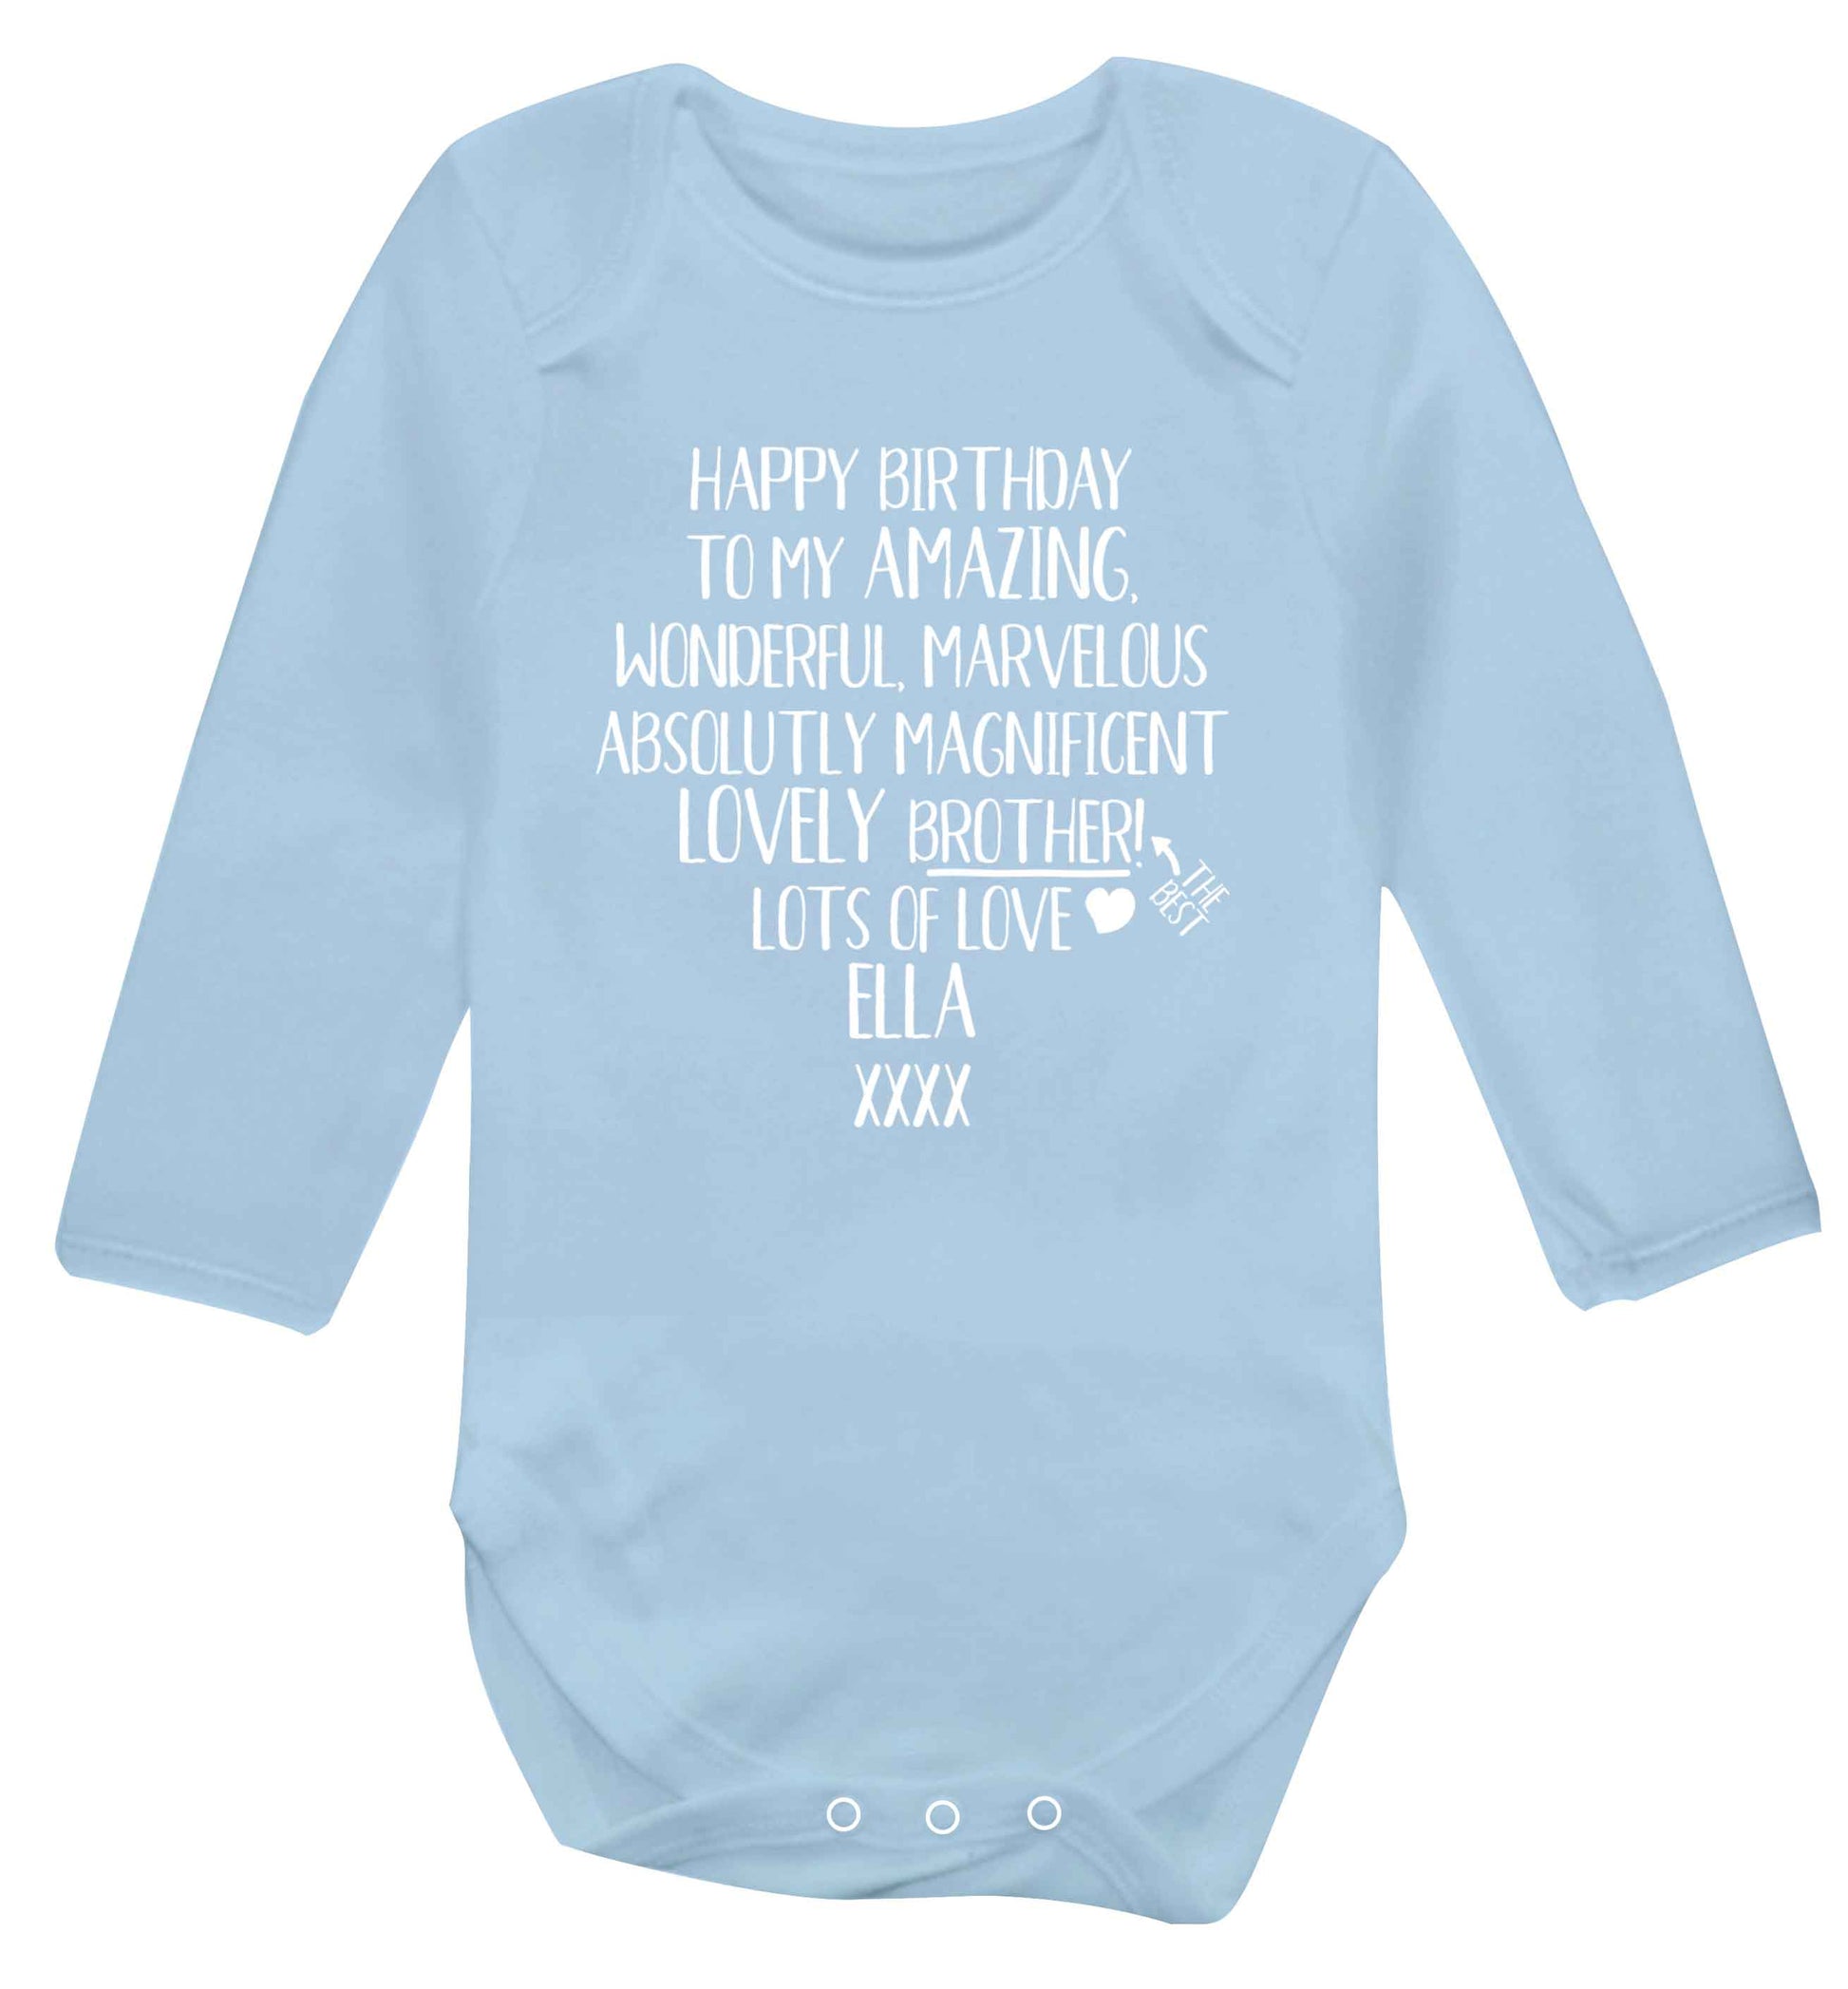 Personalised happy birthday to my amazing, wonderful, lovely brother Baby Vest long sleeved pale blue 6-12 months